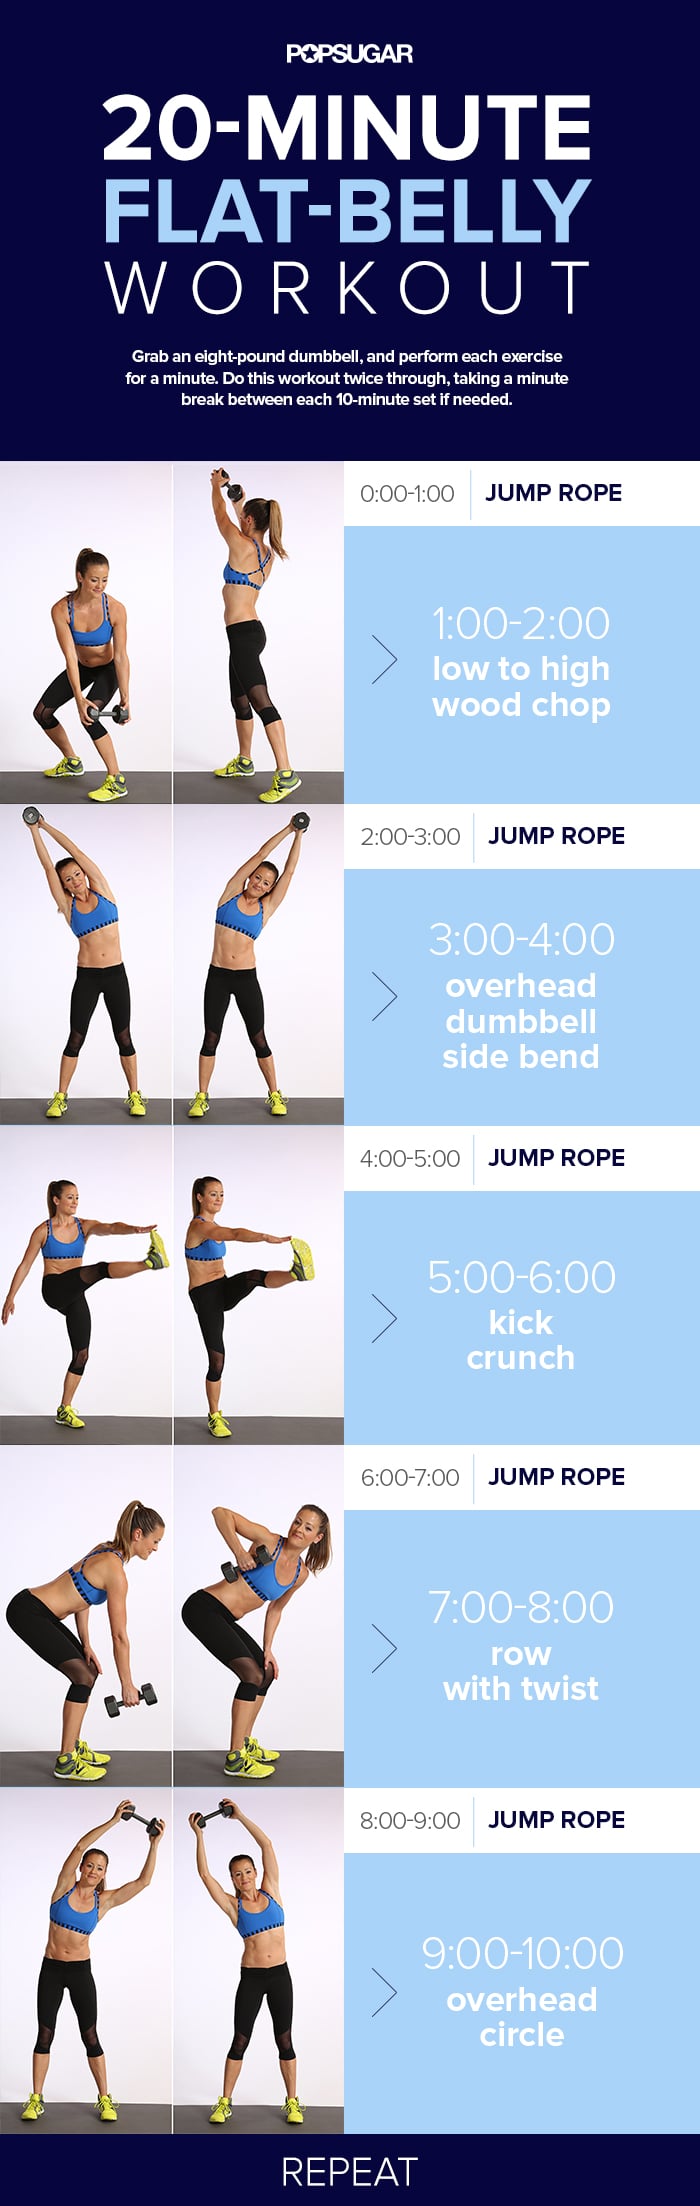 A Hardcore Cardio and Strength Workout For Killer Abs